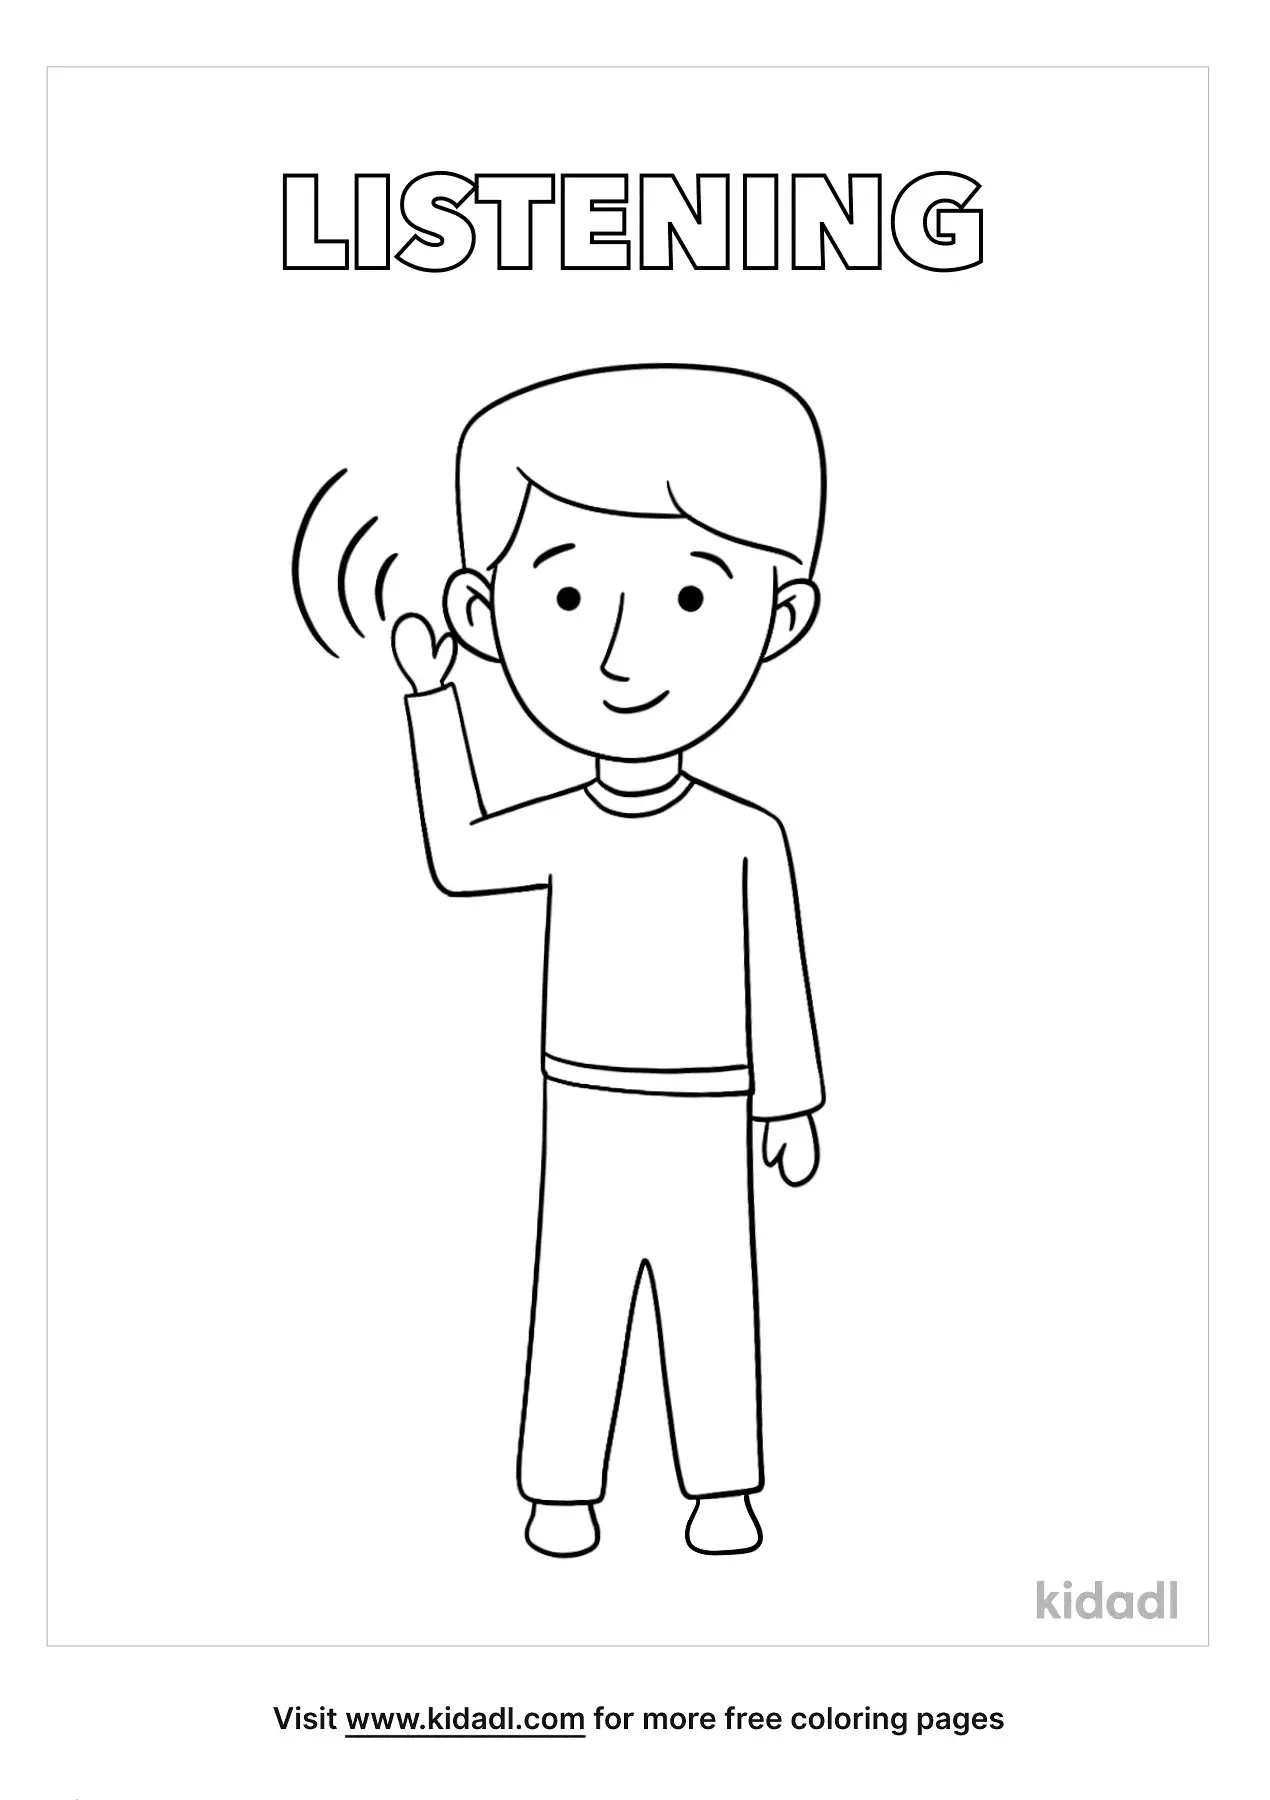 free-listening-coloring-page-coloring-page-printables-kidadl